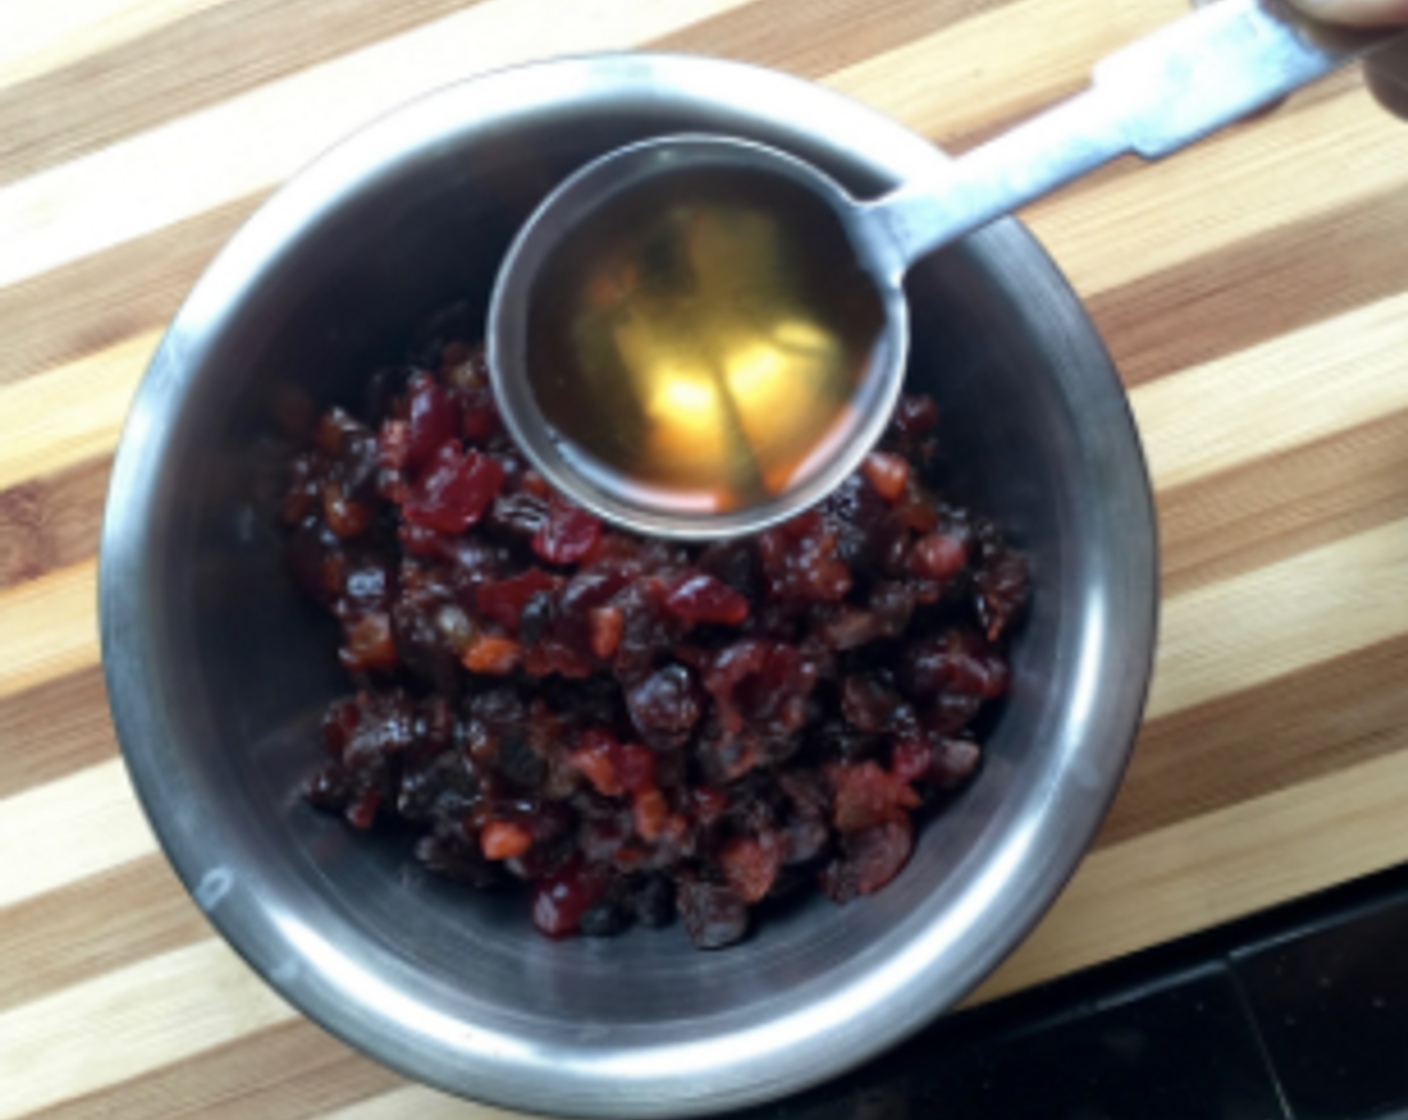 step 16 Mix in a tablespoon rum into the store bought or homemade christmas fruit mince or mincemeat to make it more flavourful.